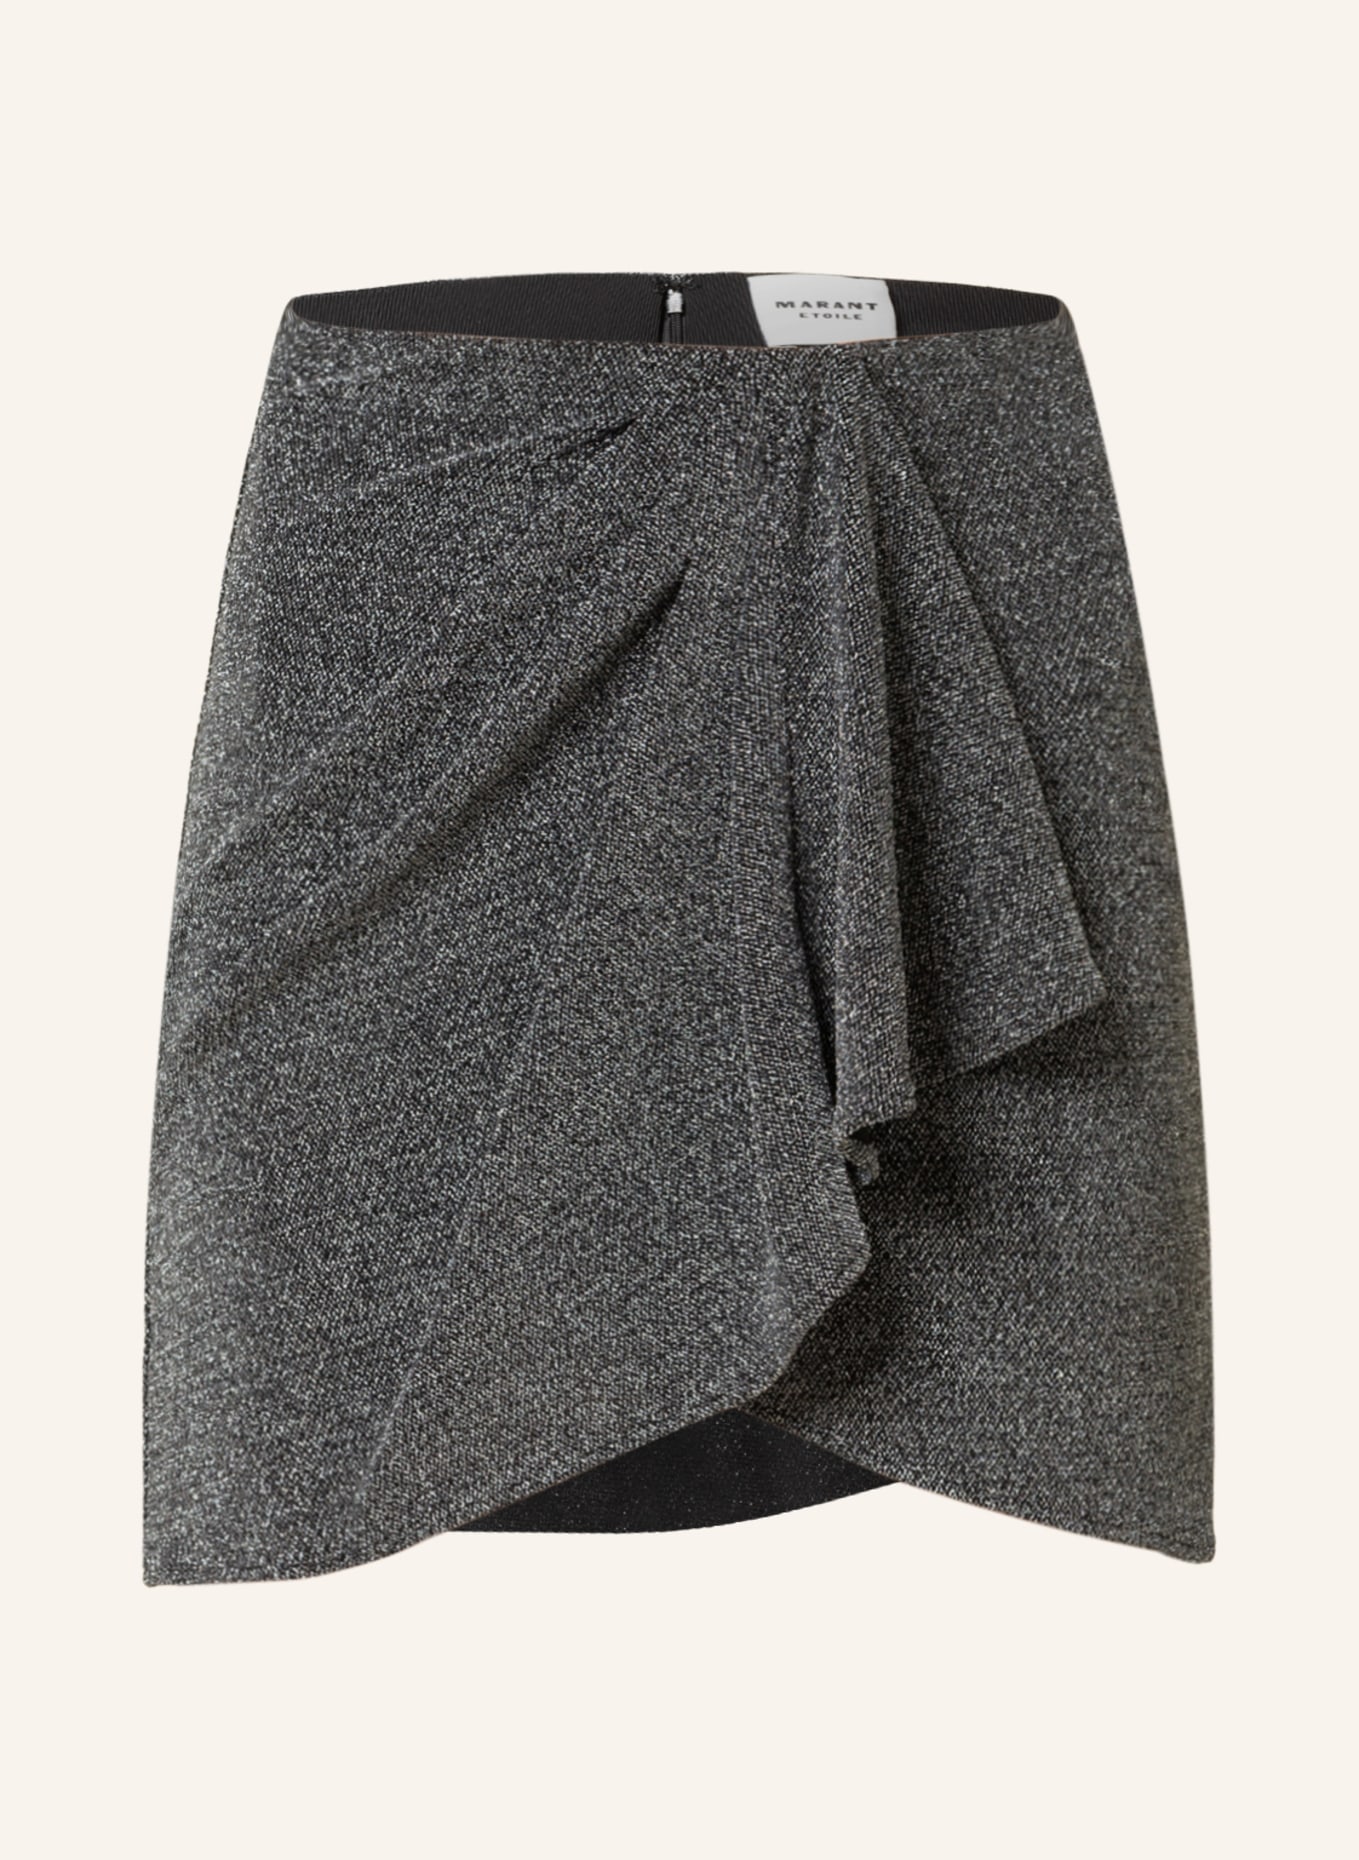 MARANT ÉTOILE Skirt BERGEN in wrap look with glitter thread, Color: BLACK/ SILVER (Image 1)